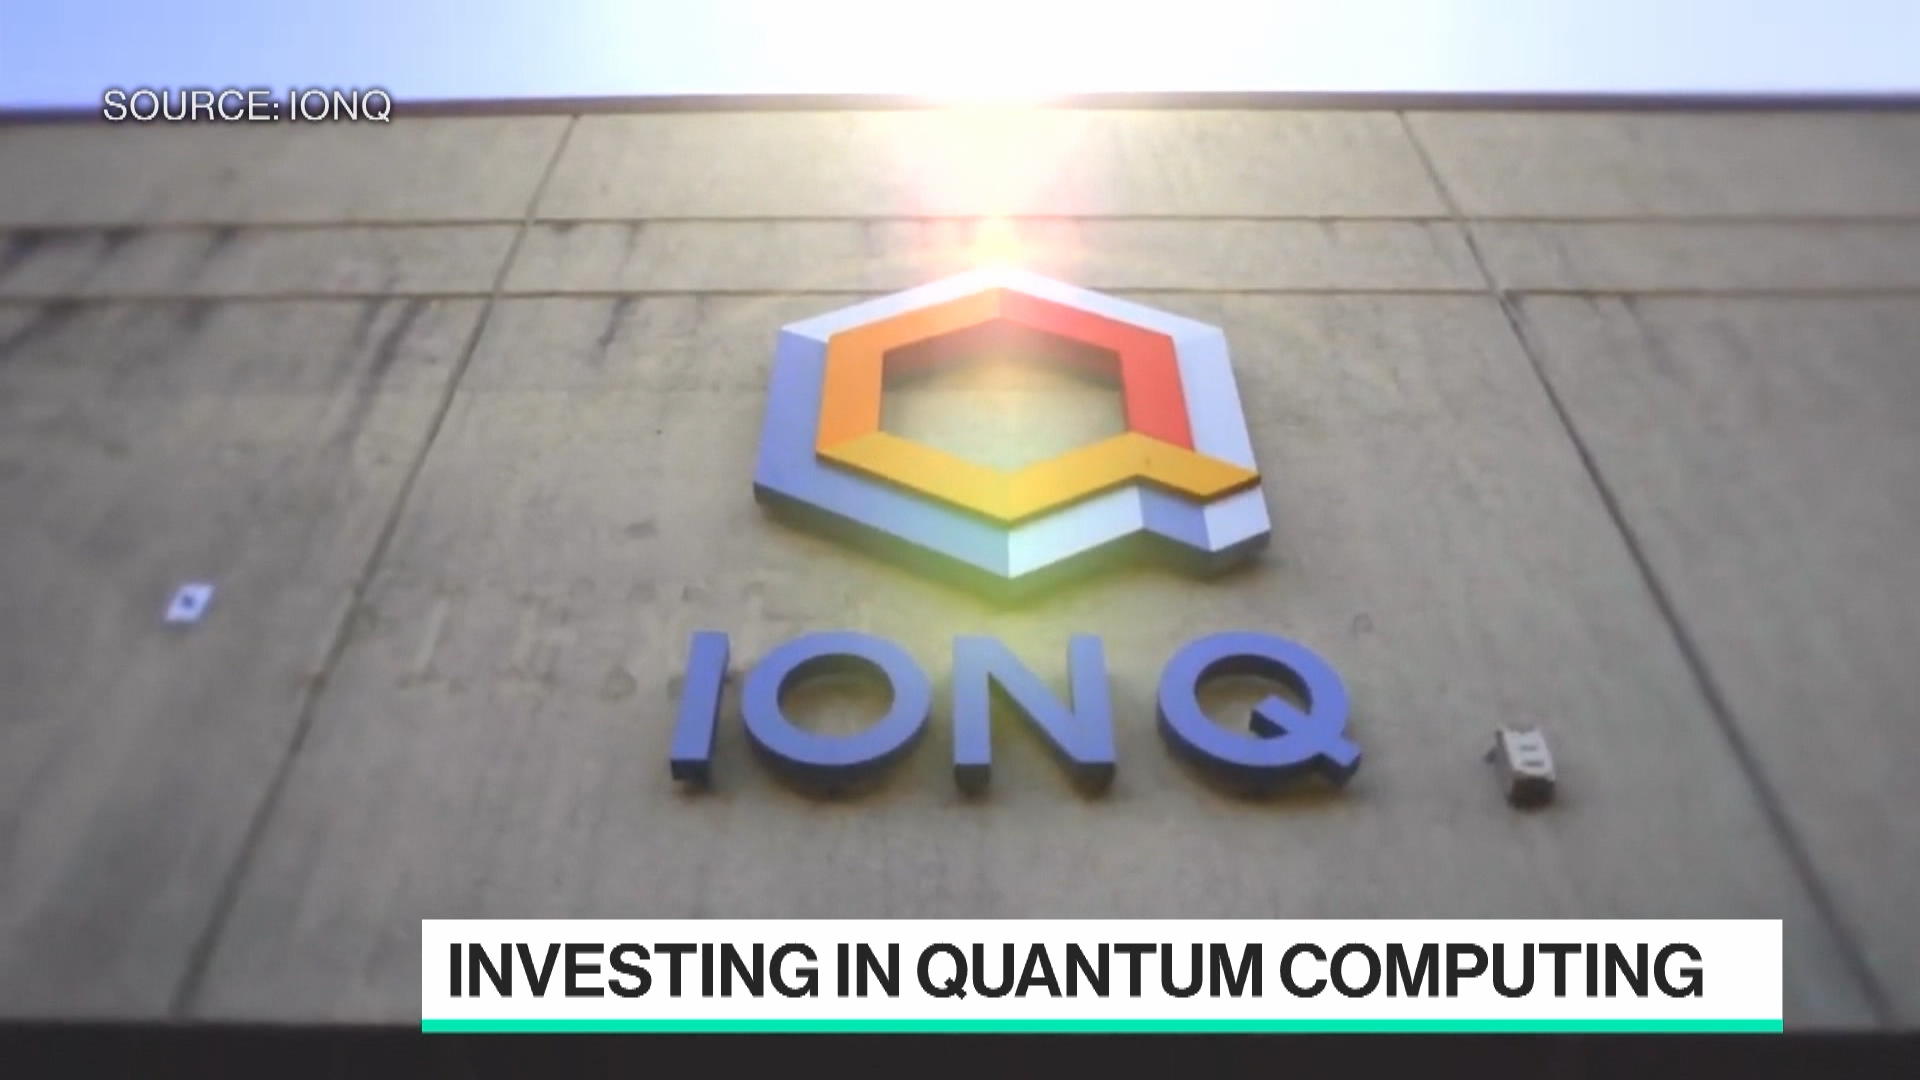 IonQ to Become First Publicly-Traded Quantum Computing Company